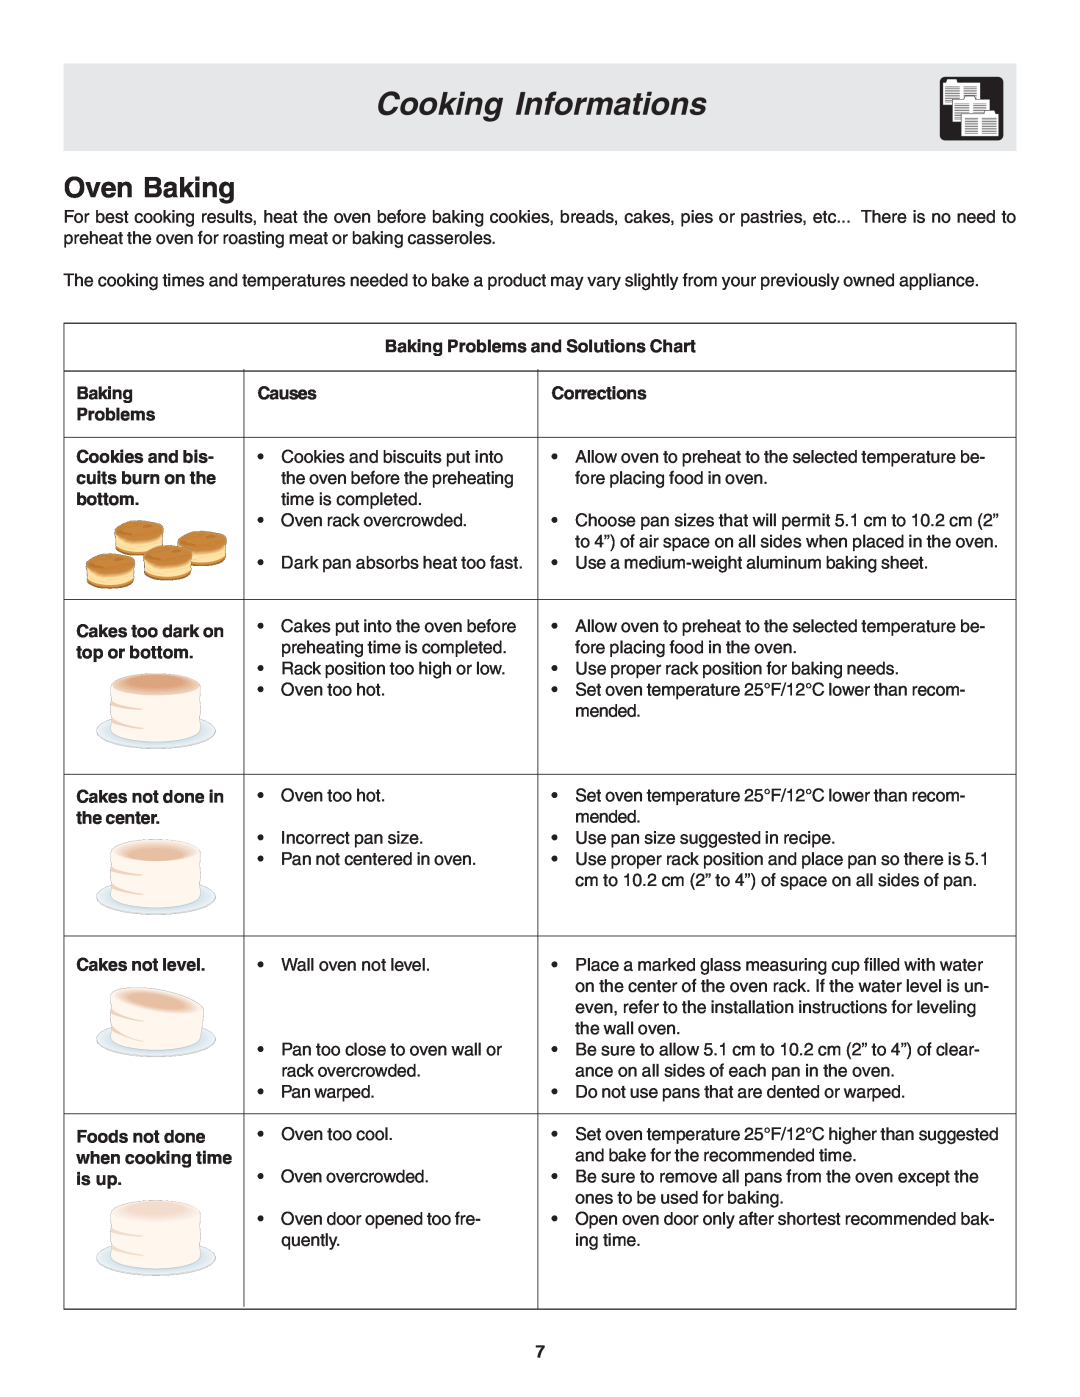 Frigidaire 318200944 Cooking Informations, Oven Baking, Baking Problems and Solutions Chart, Causes, Corrections, bottom 